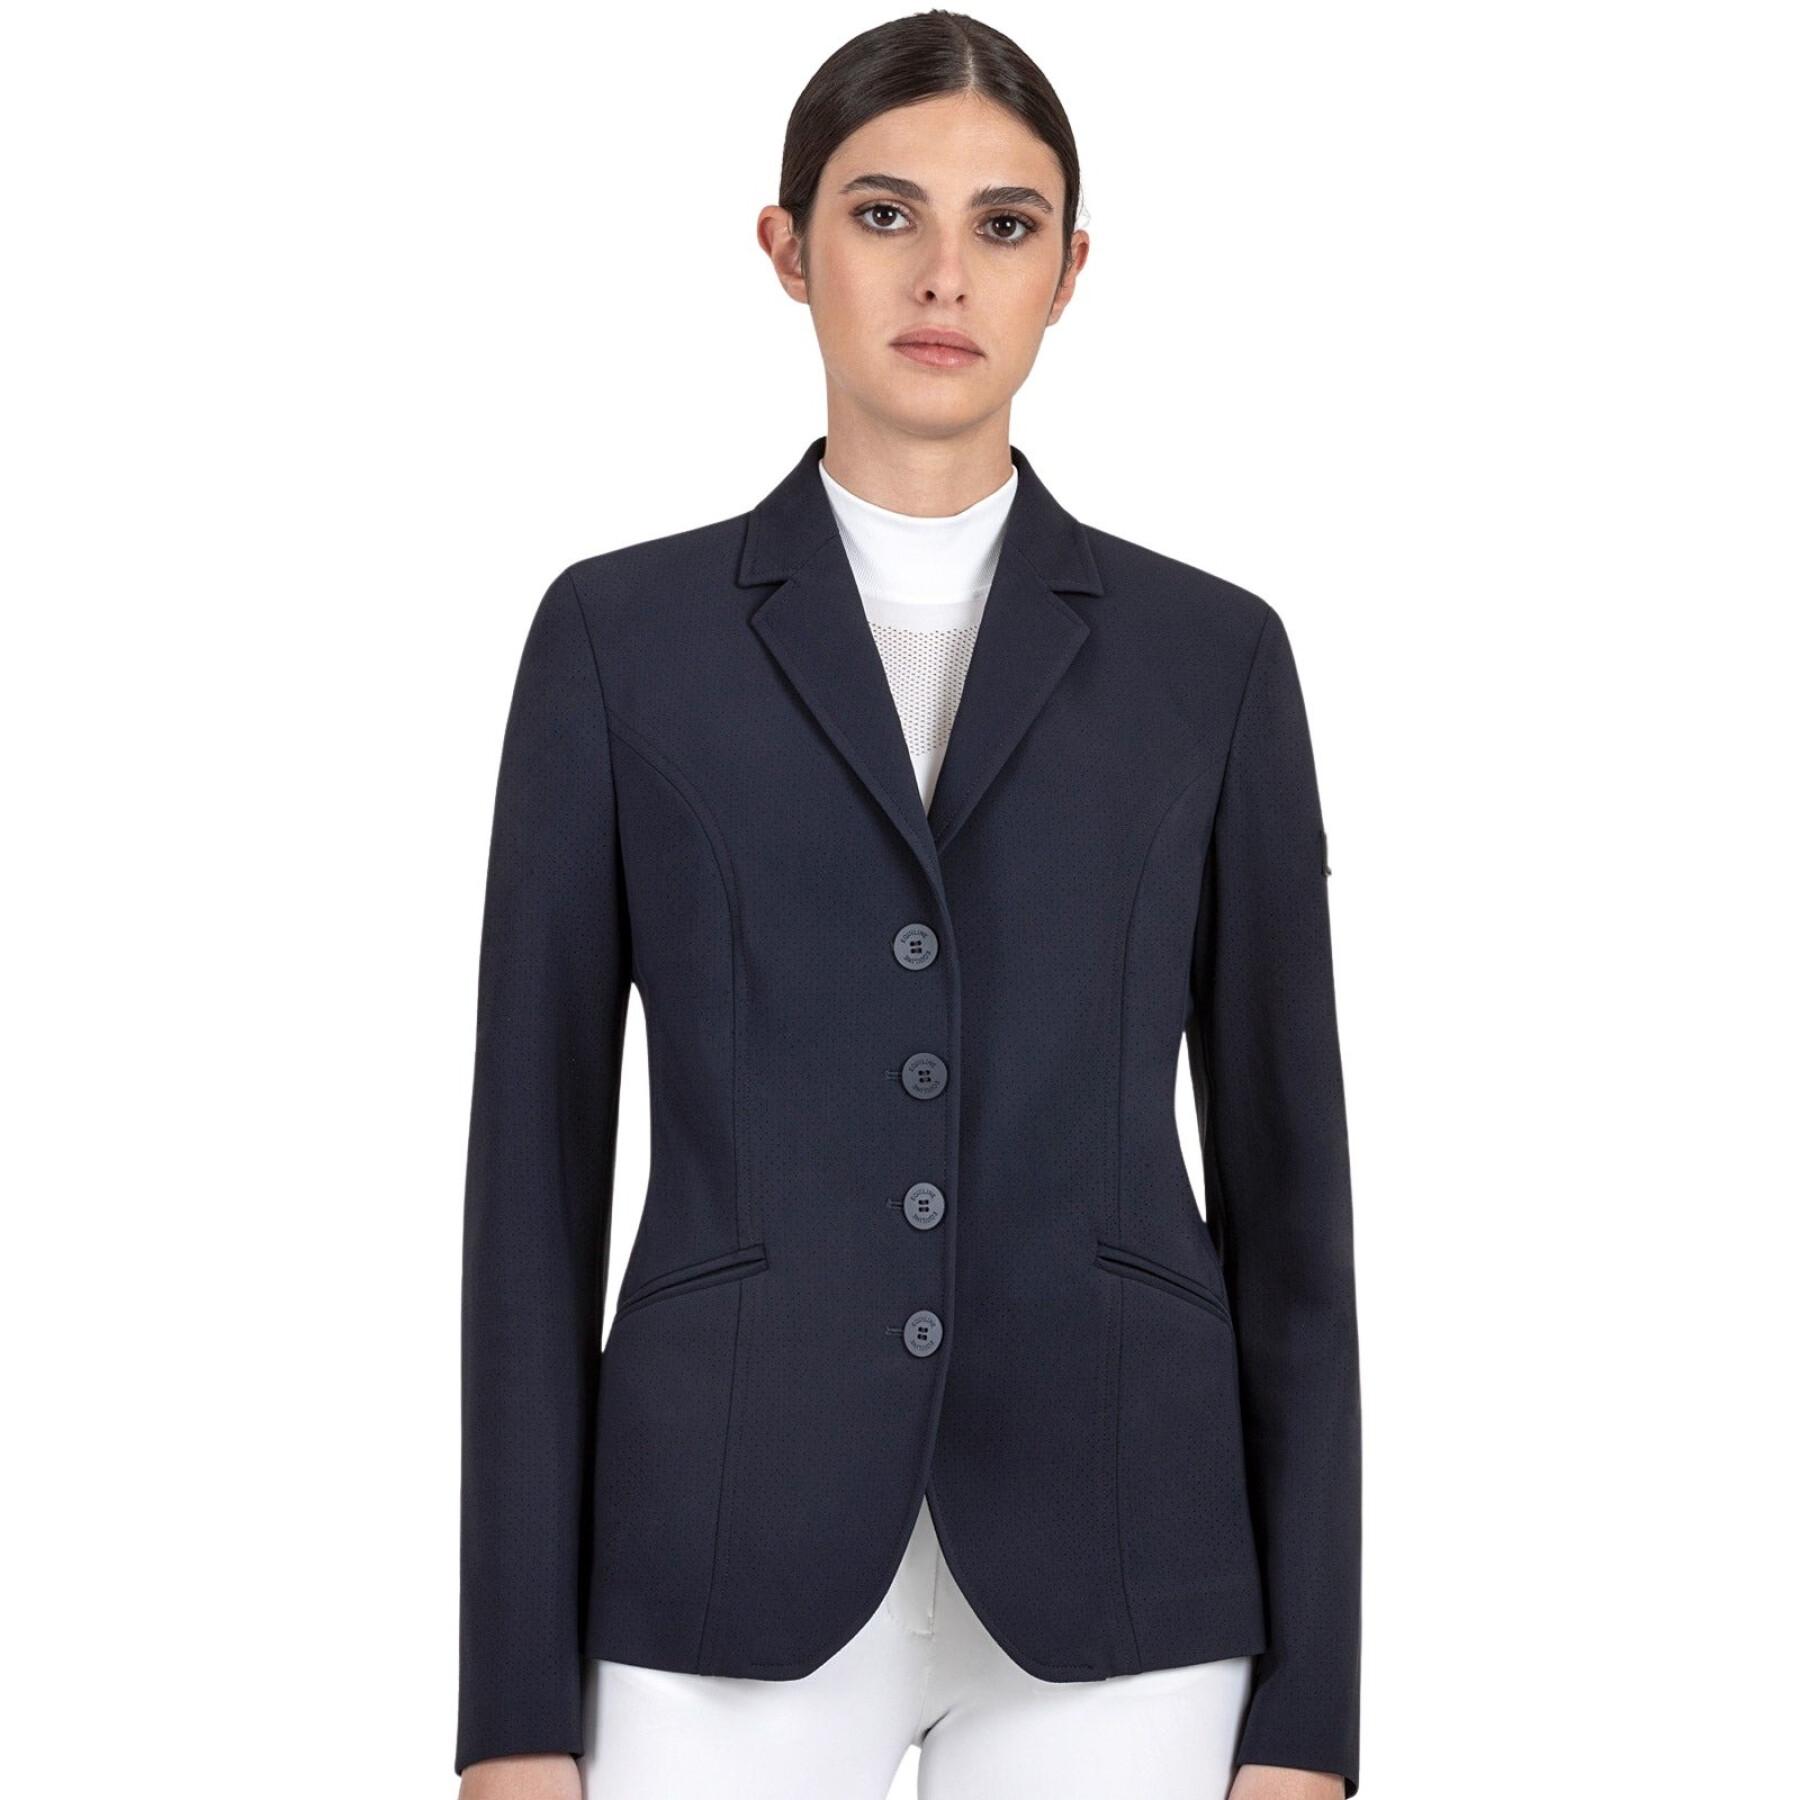 Riding jacket for women Equiline Cozyc